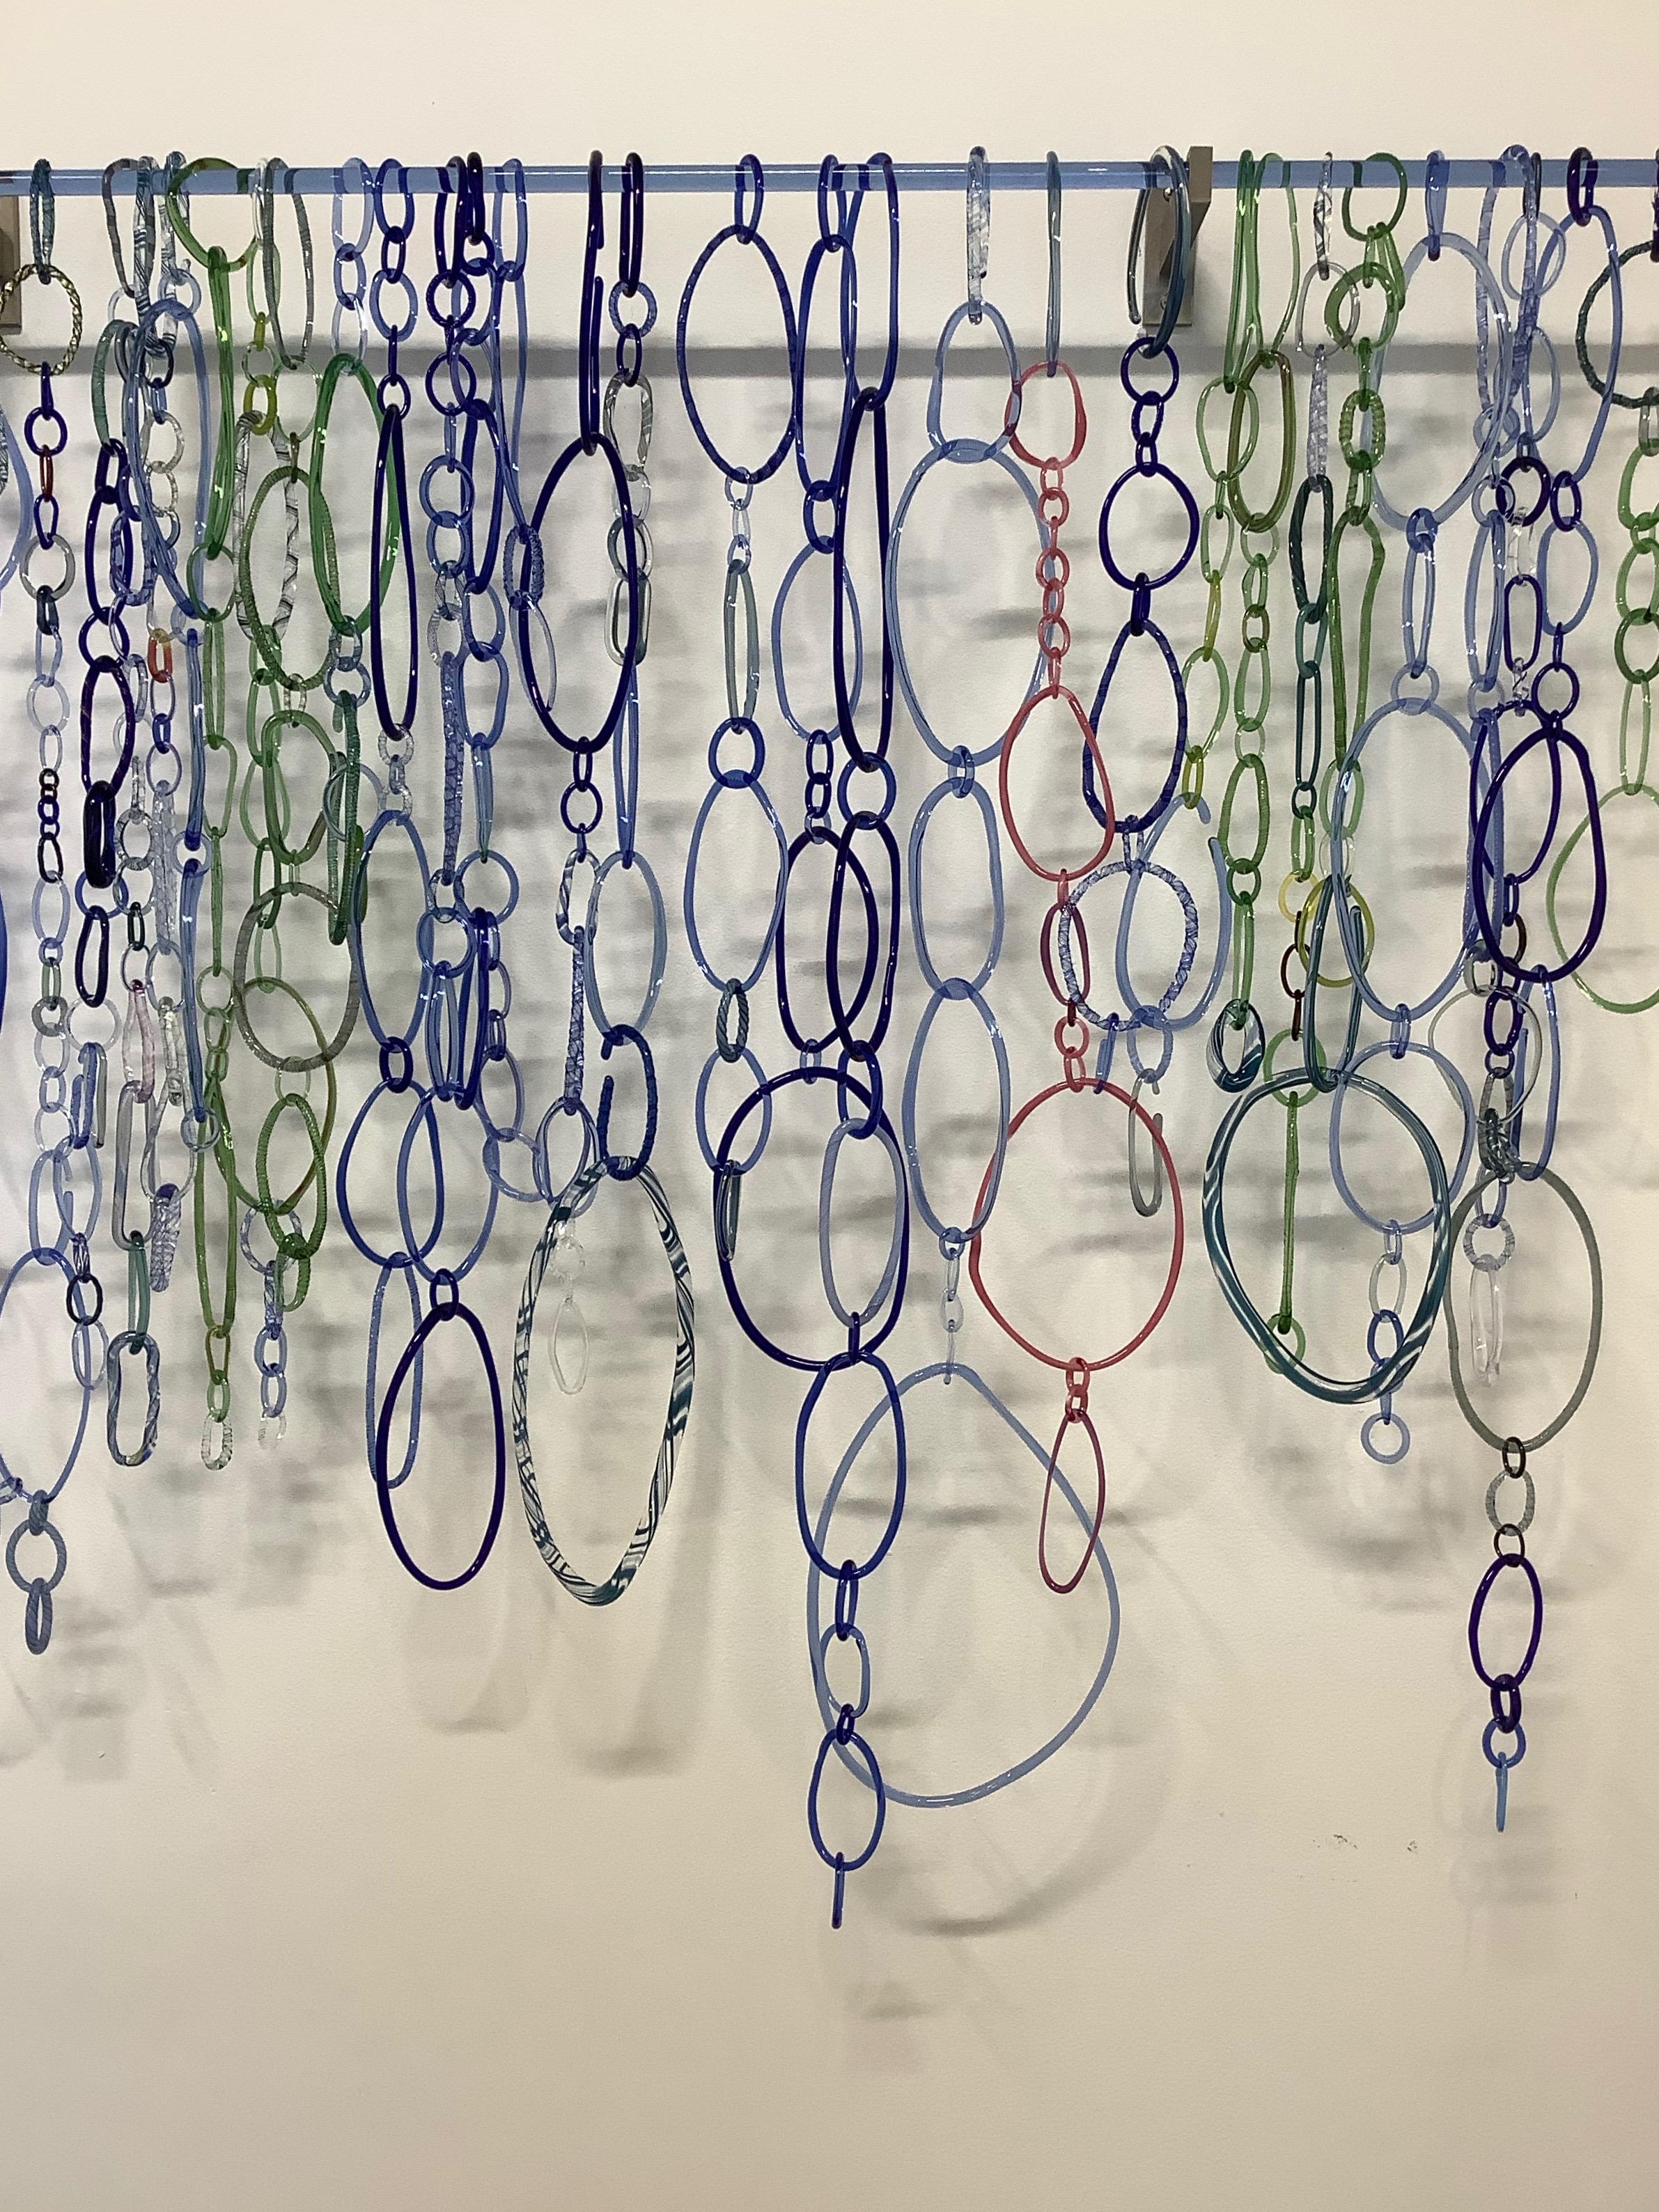 This hanging sculpture by David Licata is composed of free-form circular and oval loops of torch-worked borosilicate glass in dark cobalt blue, light green, light blue, teal and golden pink. The loops, in varying sizes and textures, cascade downward